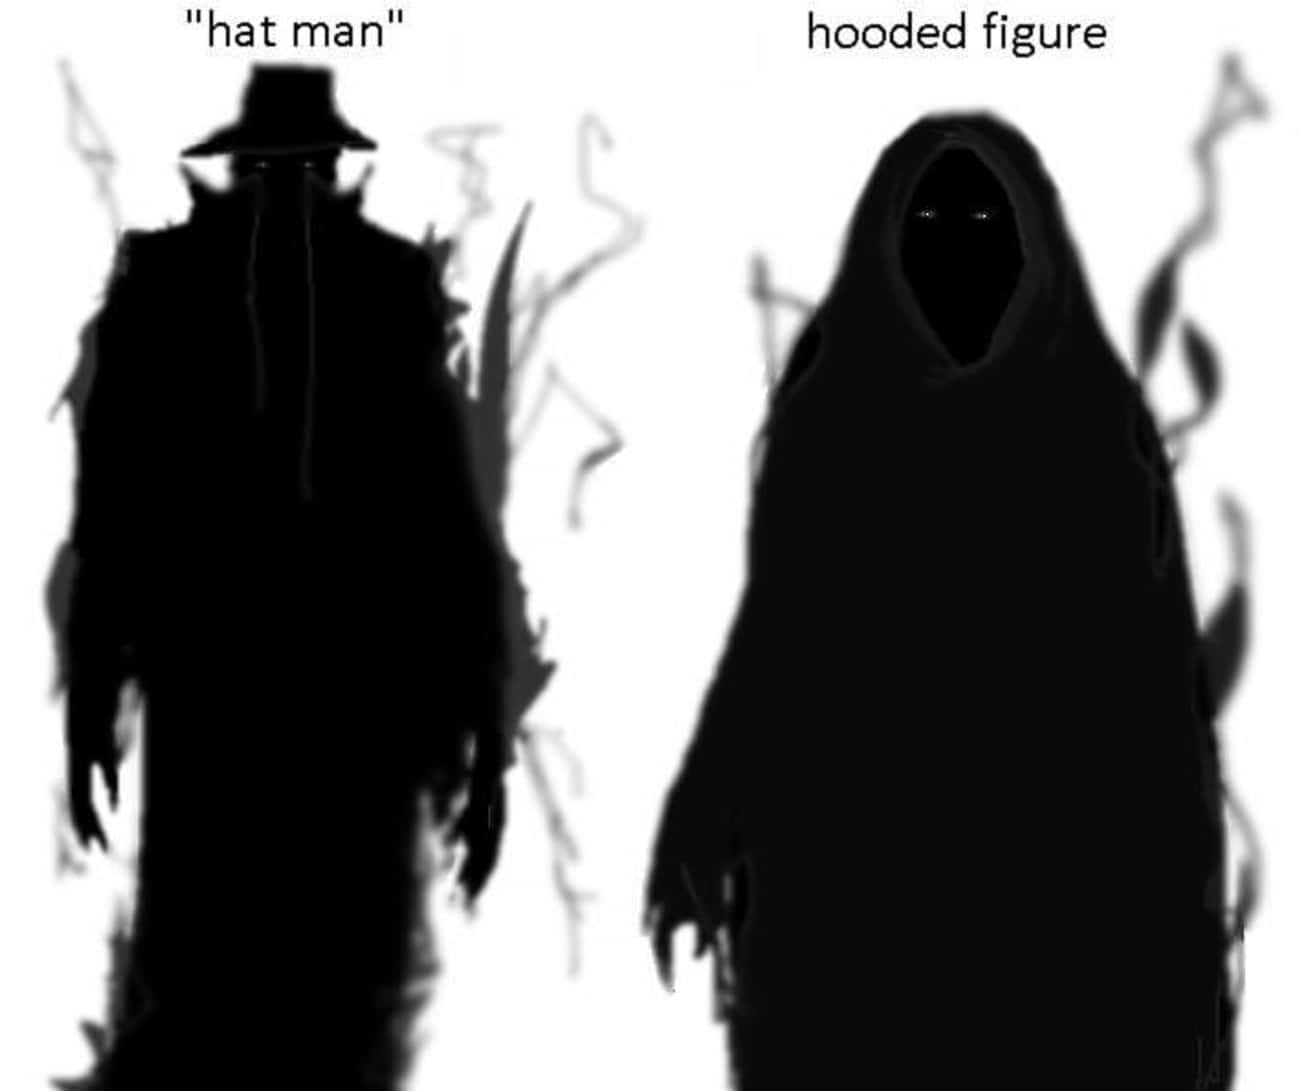 No One Knows Who The Hat Man Really Is But He May Be An Interdimensional Being Or Astral Projection Like Shadow People